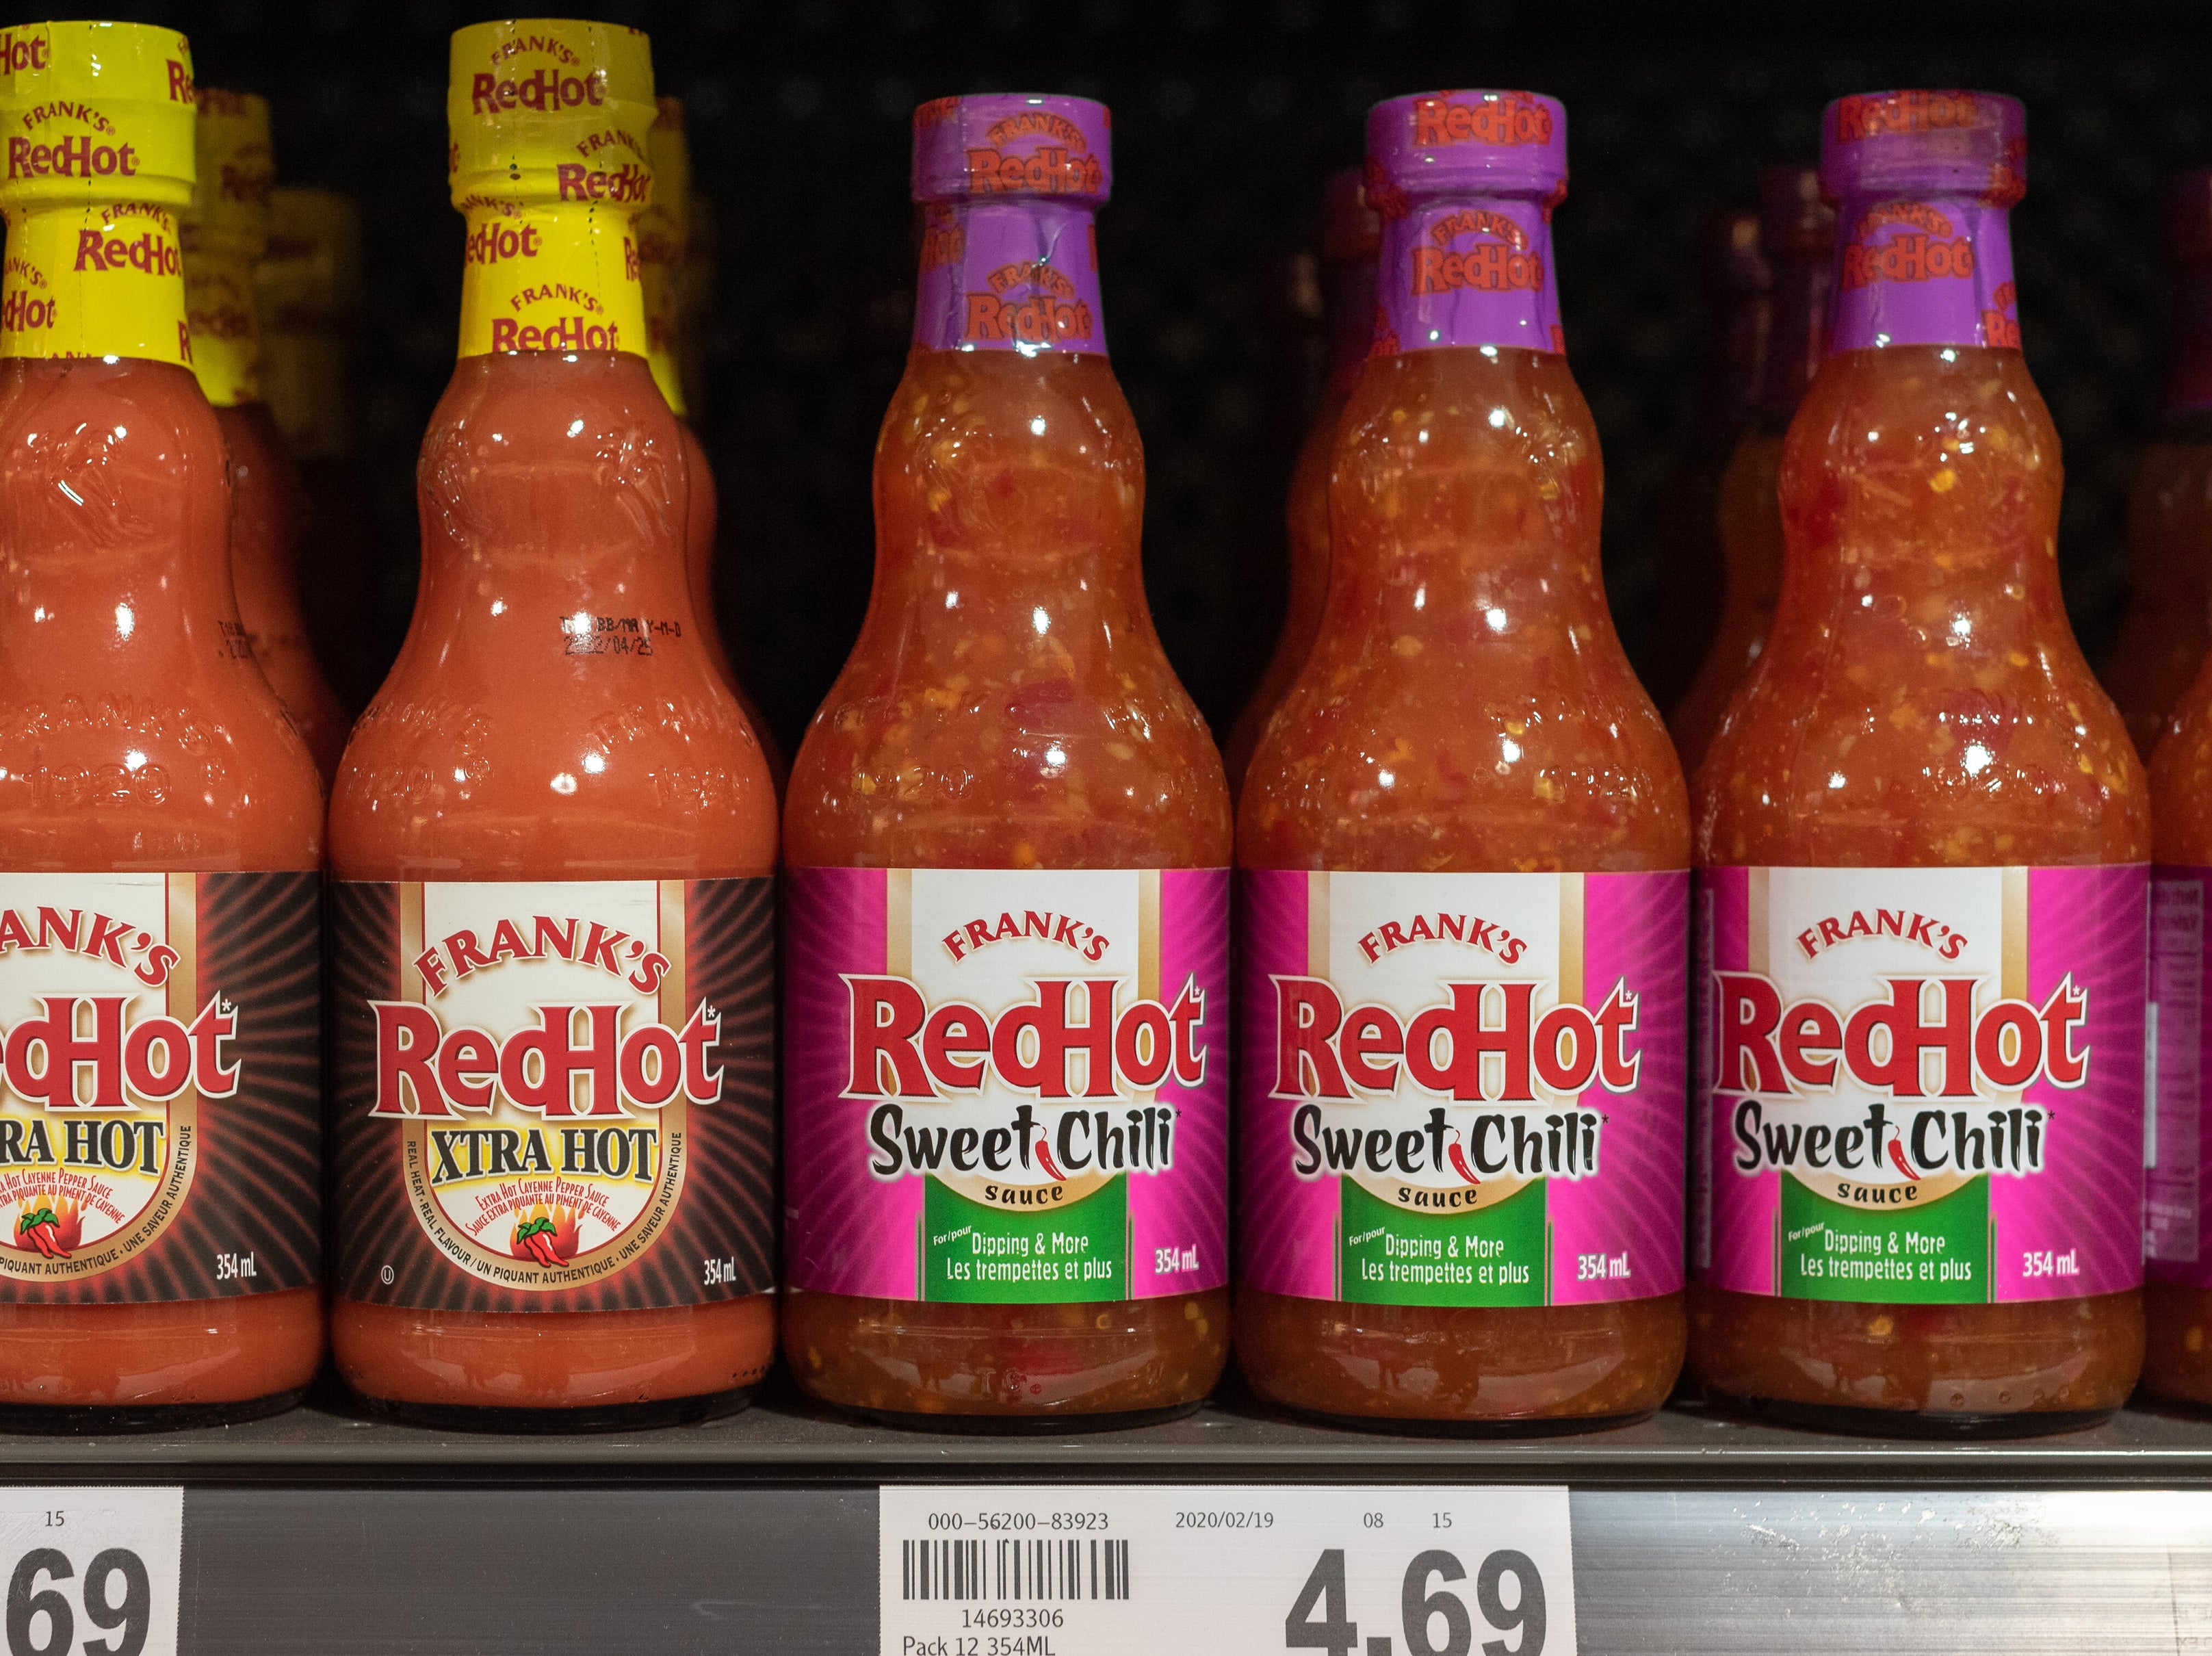 Bottles of Frank&#x27;s RedHot Xtra Hot and Sweet Chili on a store shelf